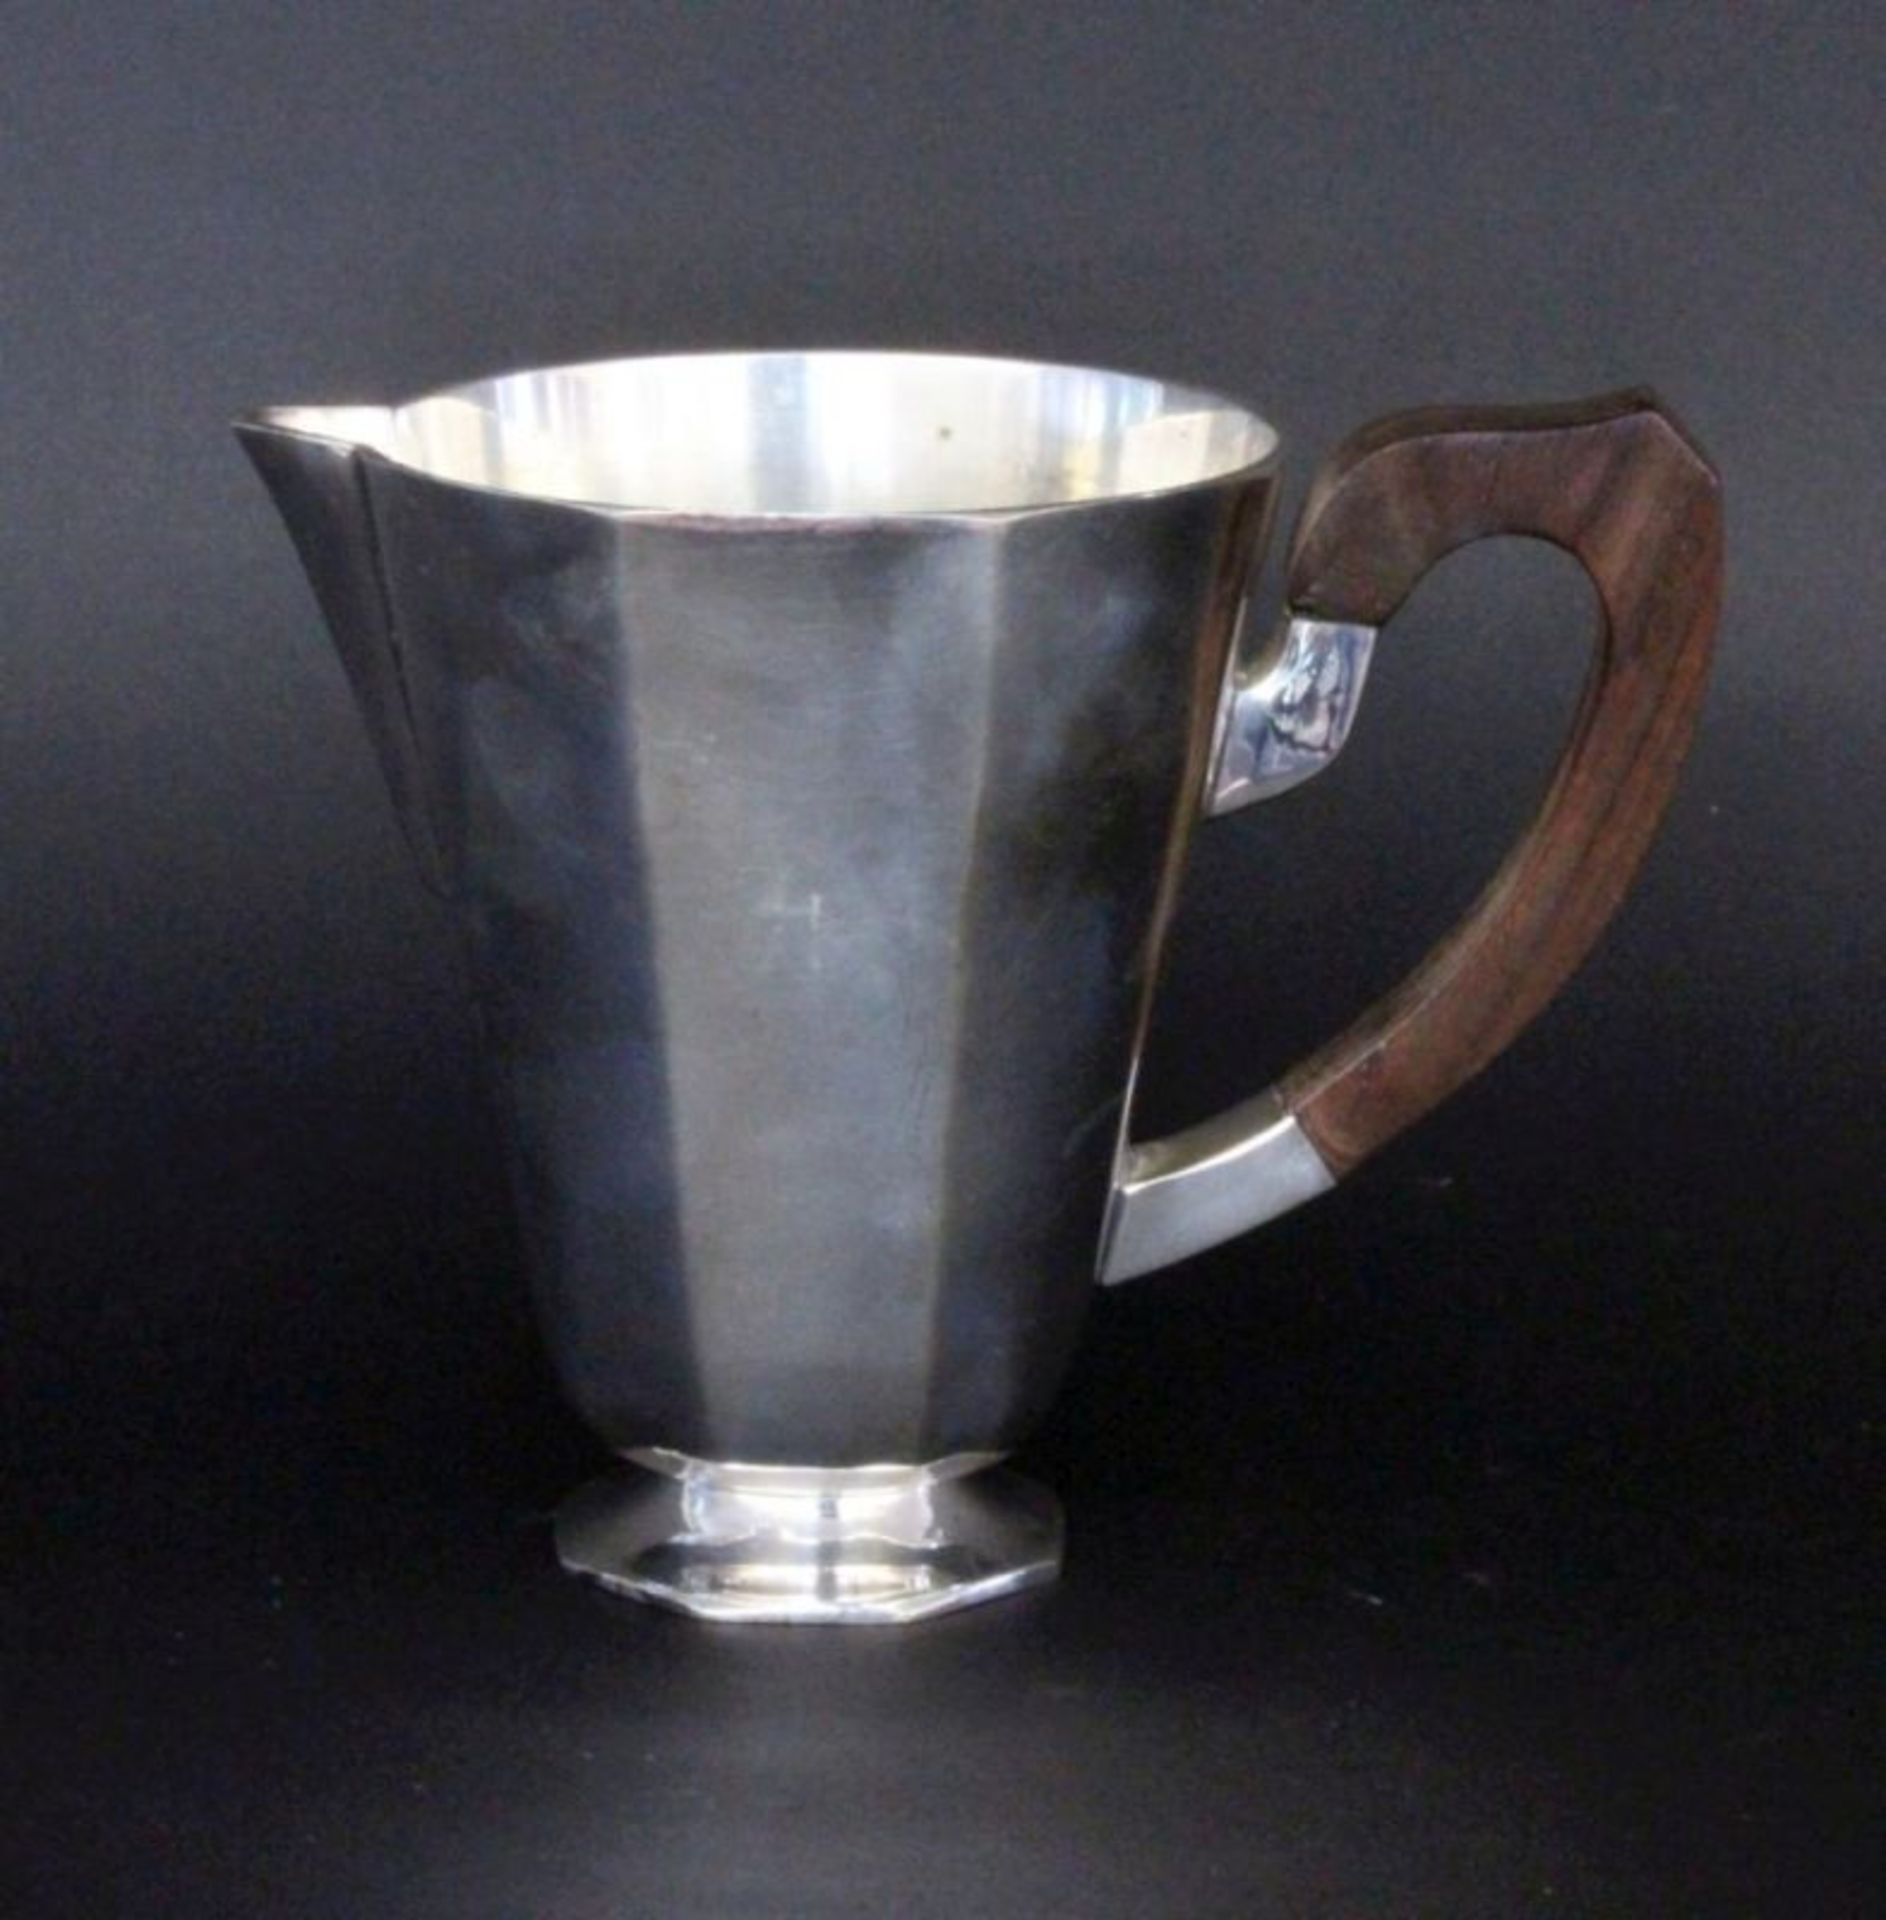 AN ART DECO JUG Silver-plated metal with wooden handle. 17cm high: Keywords: varia, collectibles,